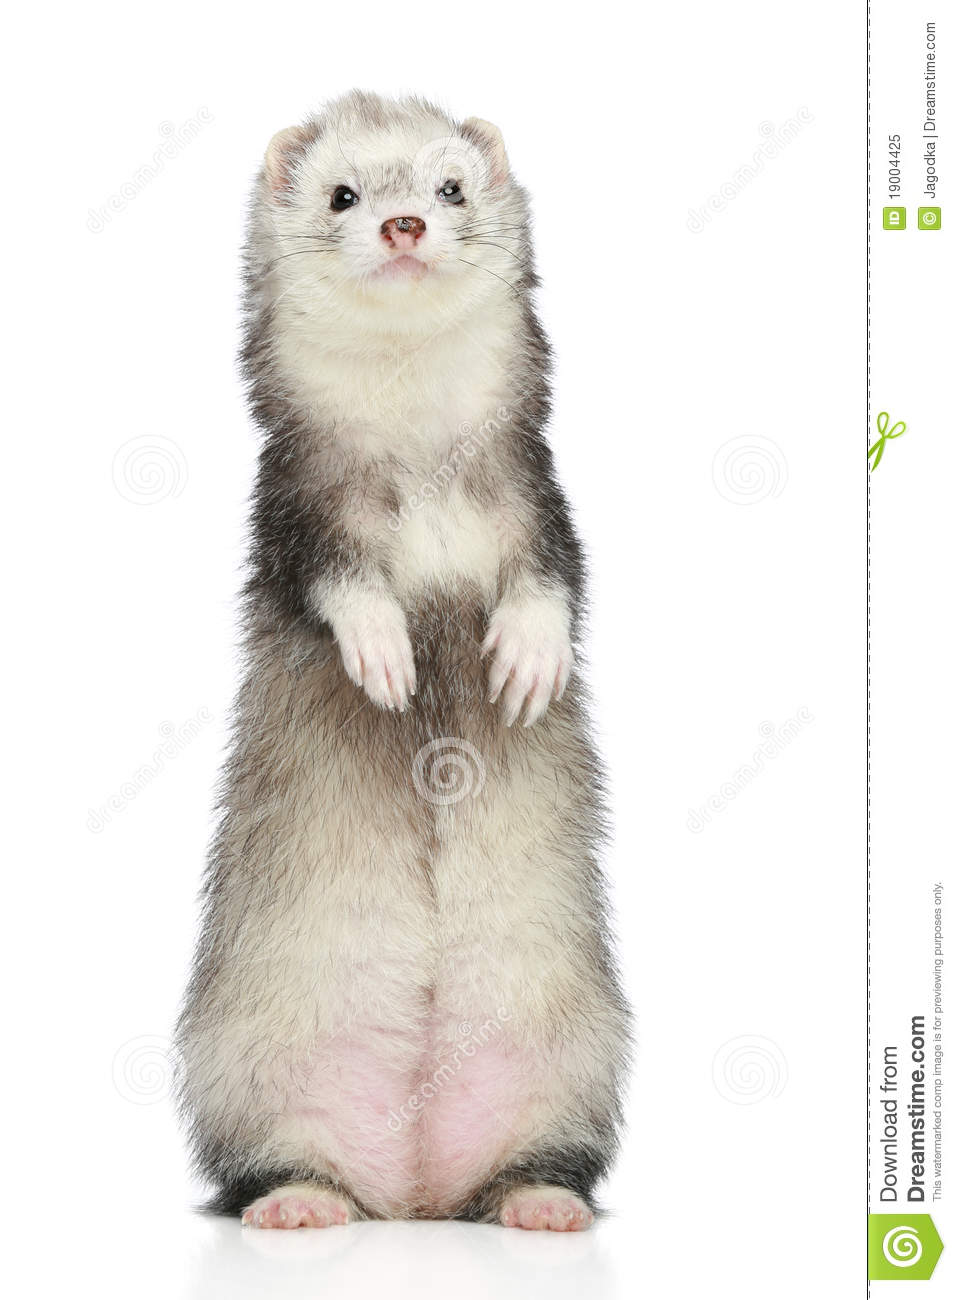 Ferret Standing On A White Background Royalty Free Stock Photo   Image